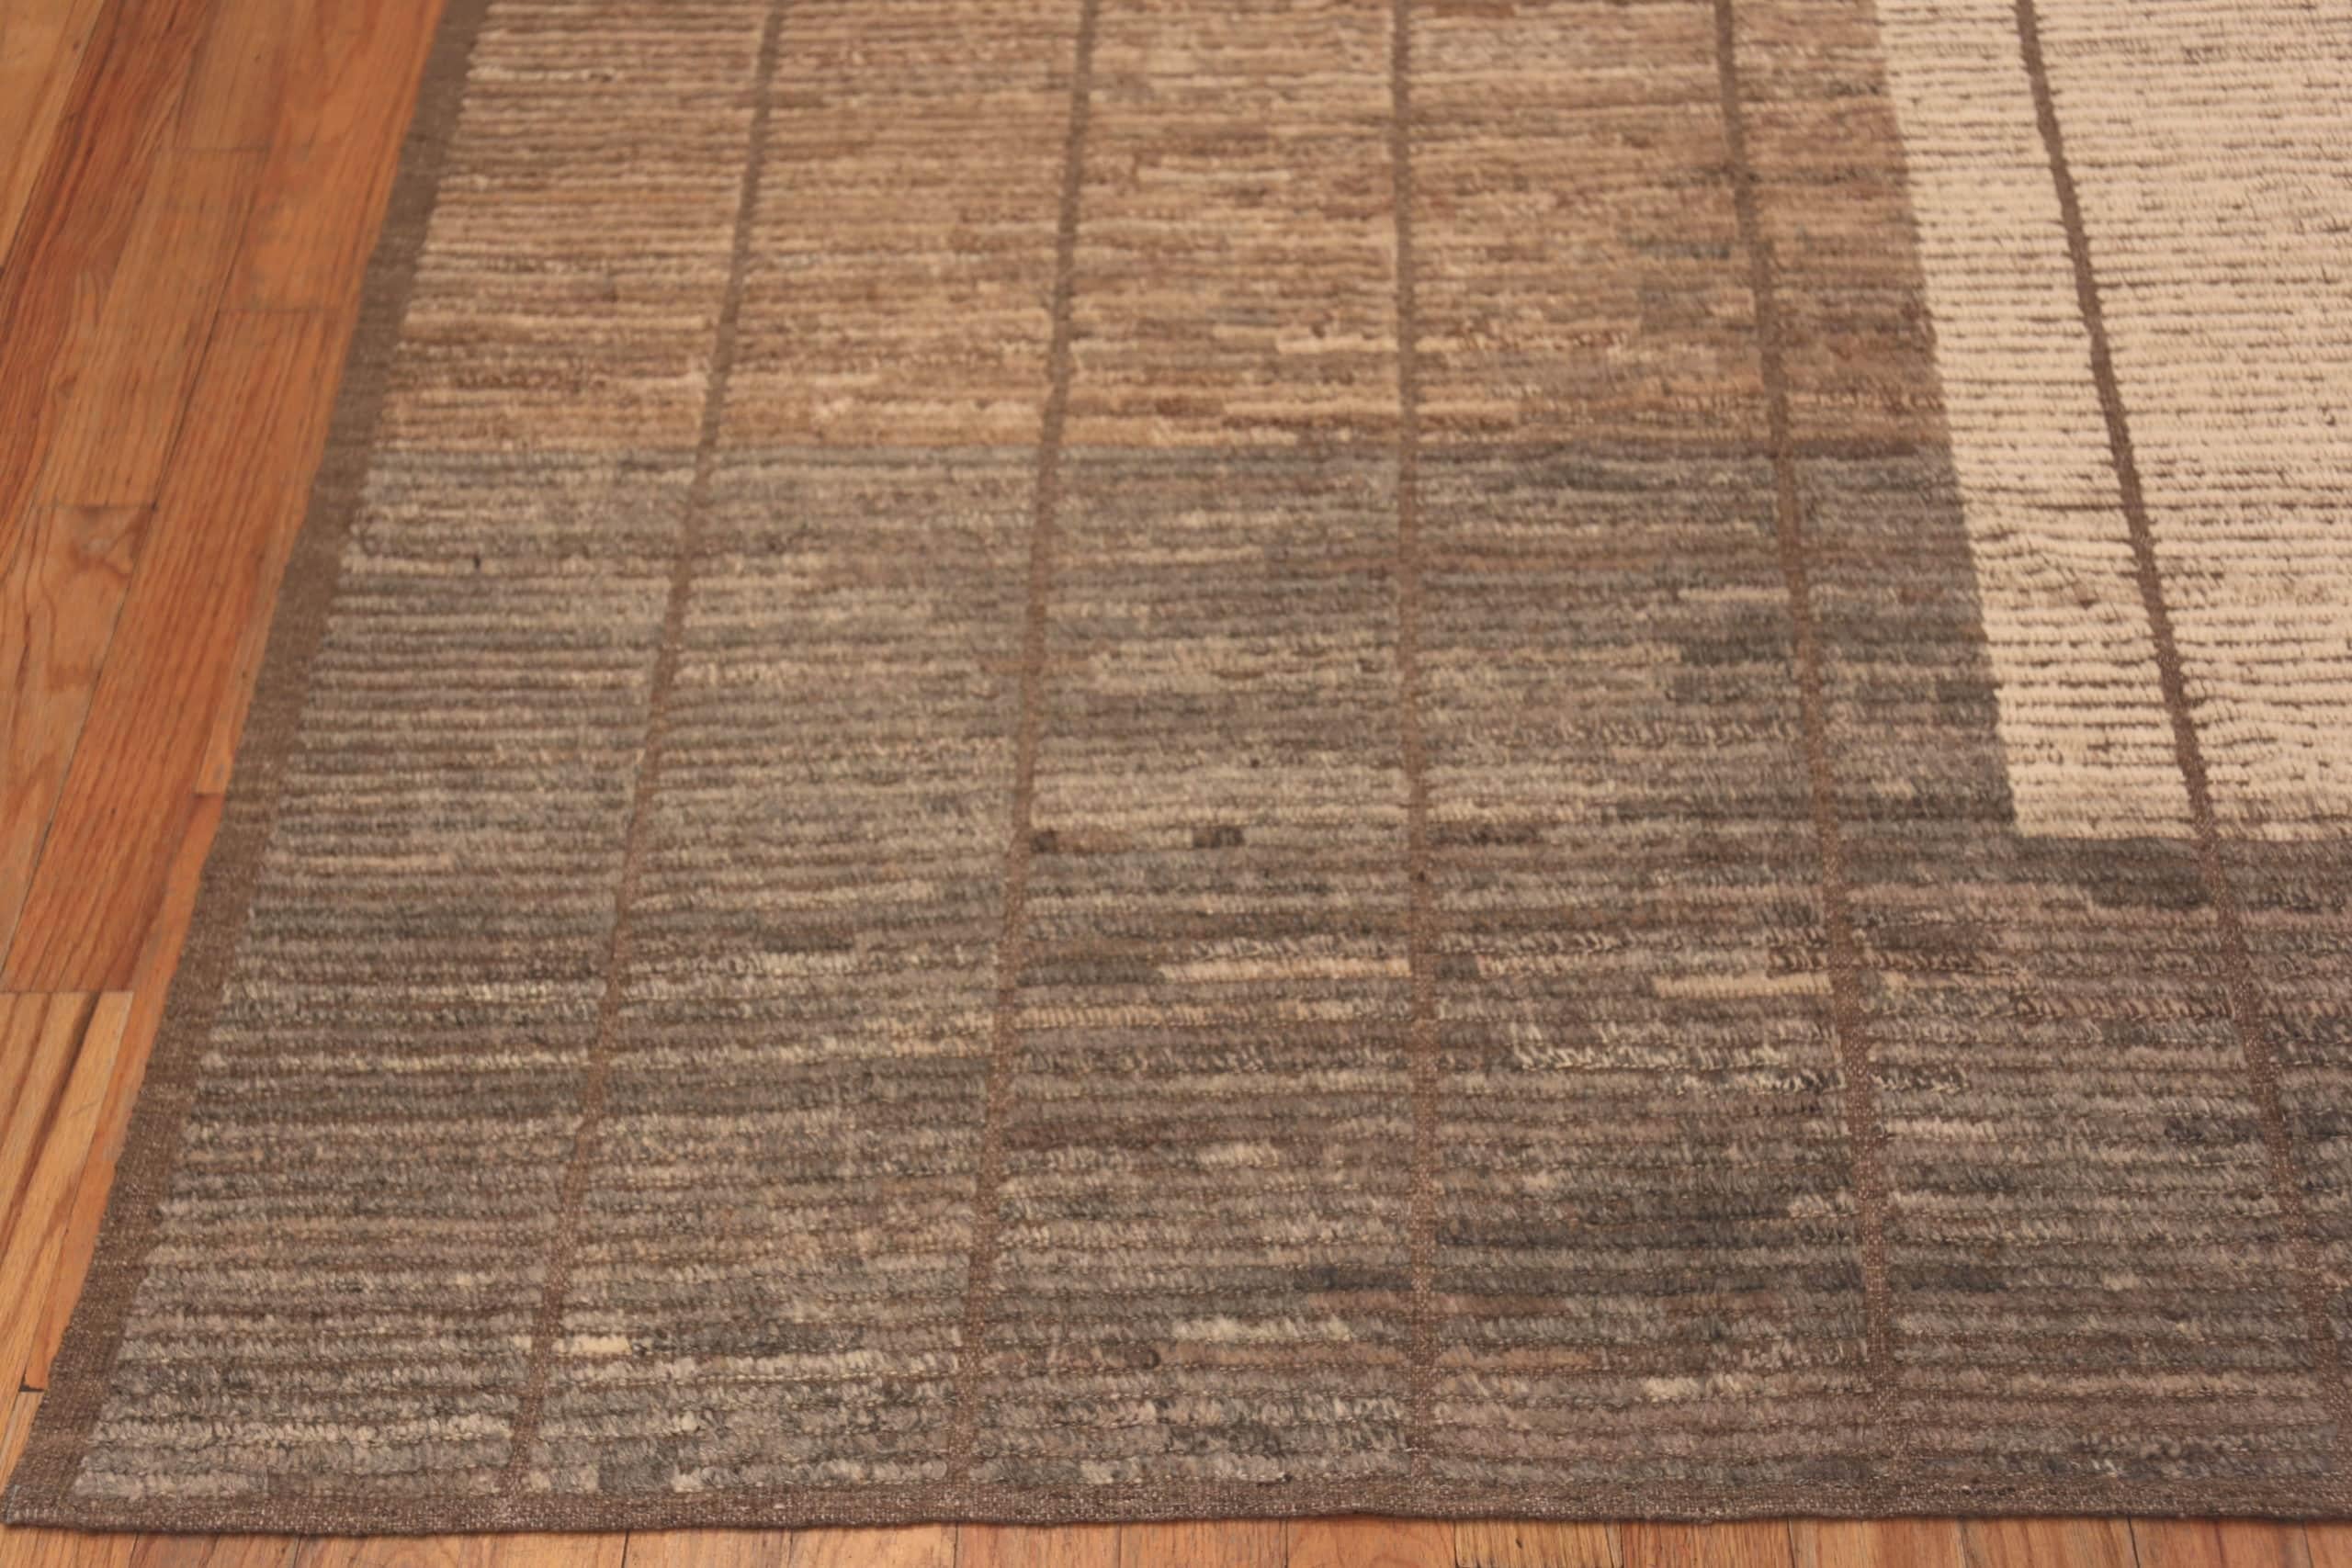 Contemporary Nazmiyal Collection Earthy Tones Modern Decorative Rug. 9 ft 3 in x 12 ft For Sale